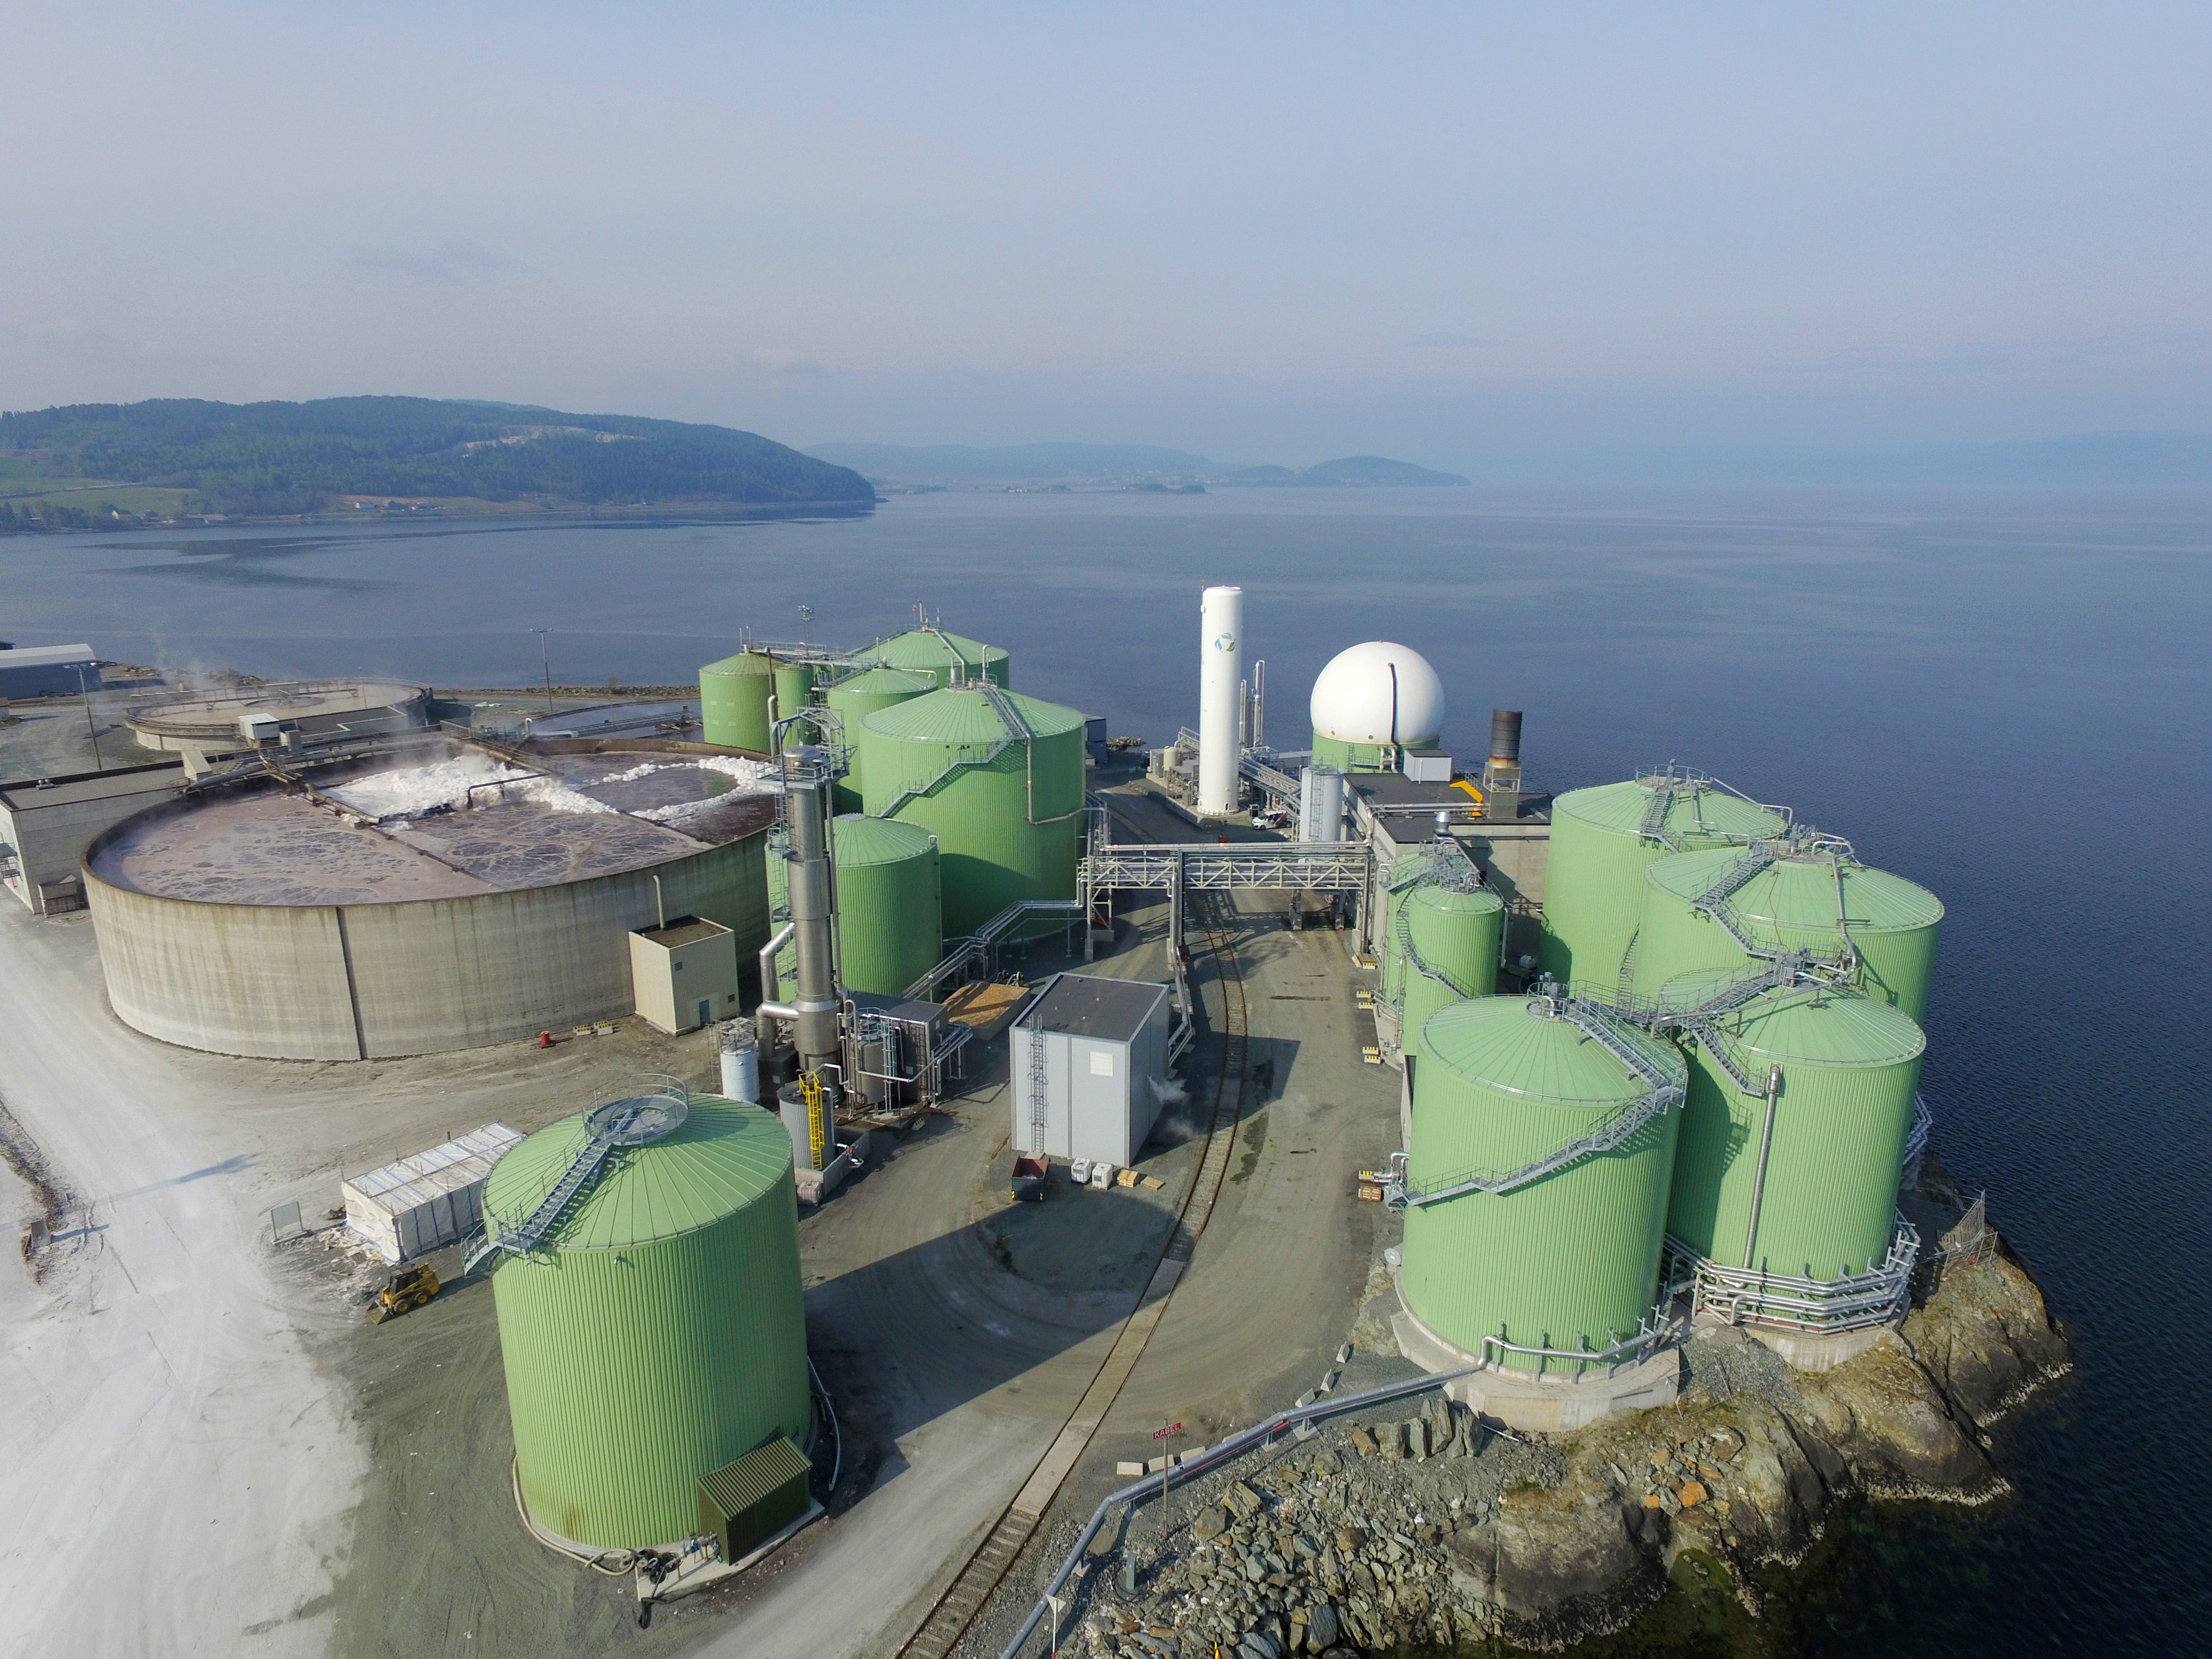 The expansion of the world's largest LBG production facility is structured in two stages: 3,500 tonnes of biofuel at Skogn II and another 6,500 tonnes at Skogn III, with the total investment estimated at EUR 30 million, representing an investment of EUR 70 million in Skogn where Biokraft's LBG production facilities are located. The two new factory stages will be built at the end of Fiborgtangen in Skogn, where land mass will be expanded into the ocean to optimally position the two new plants.  